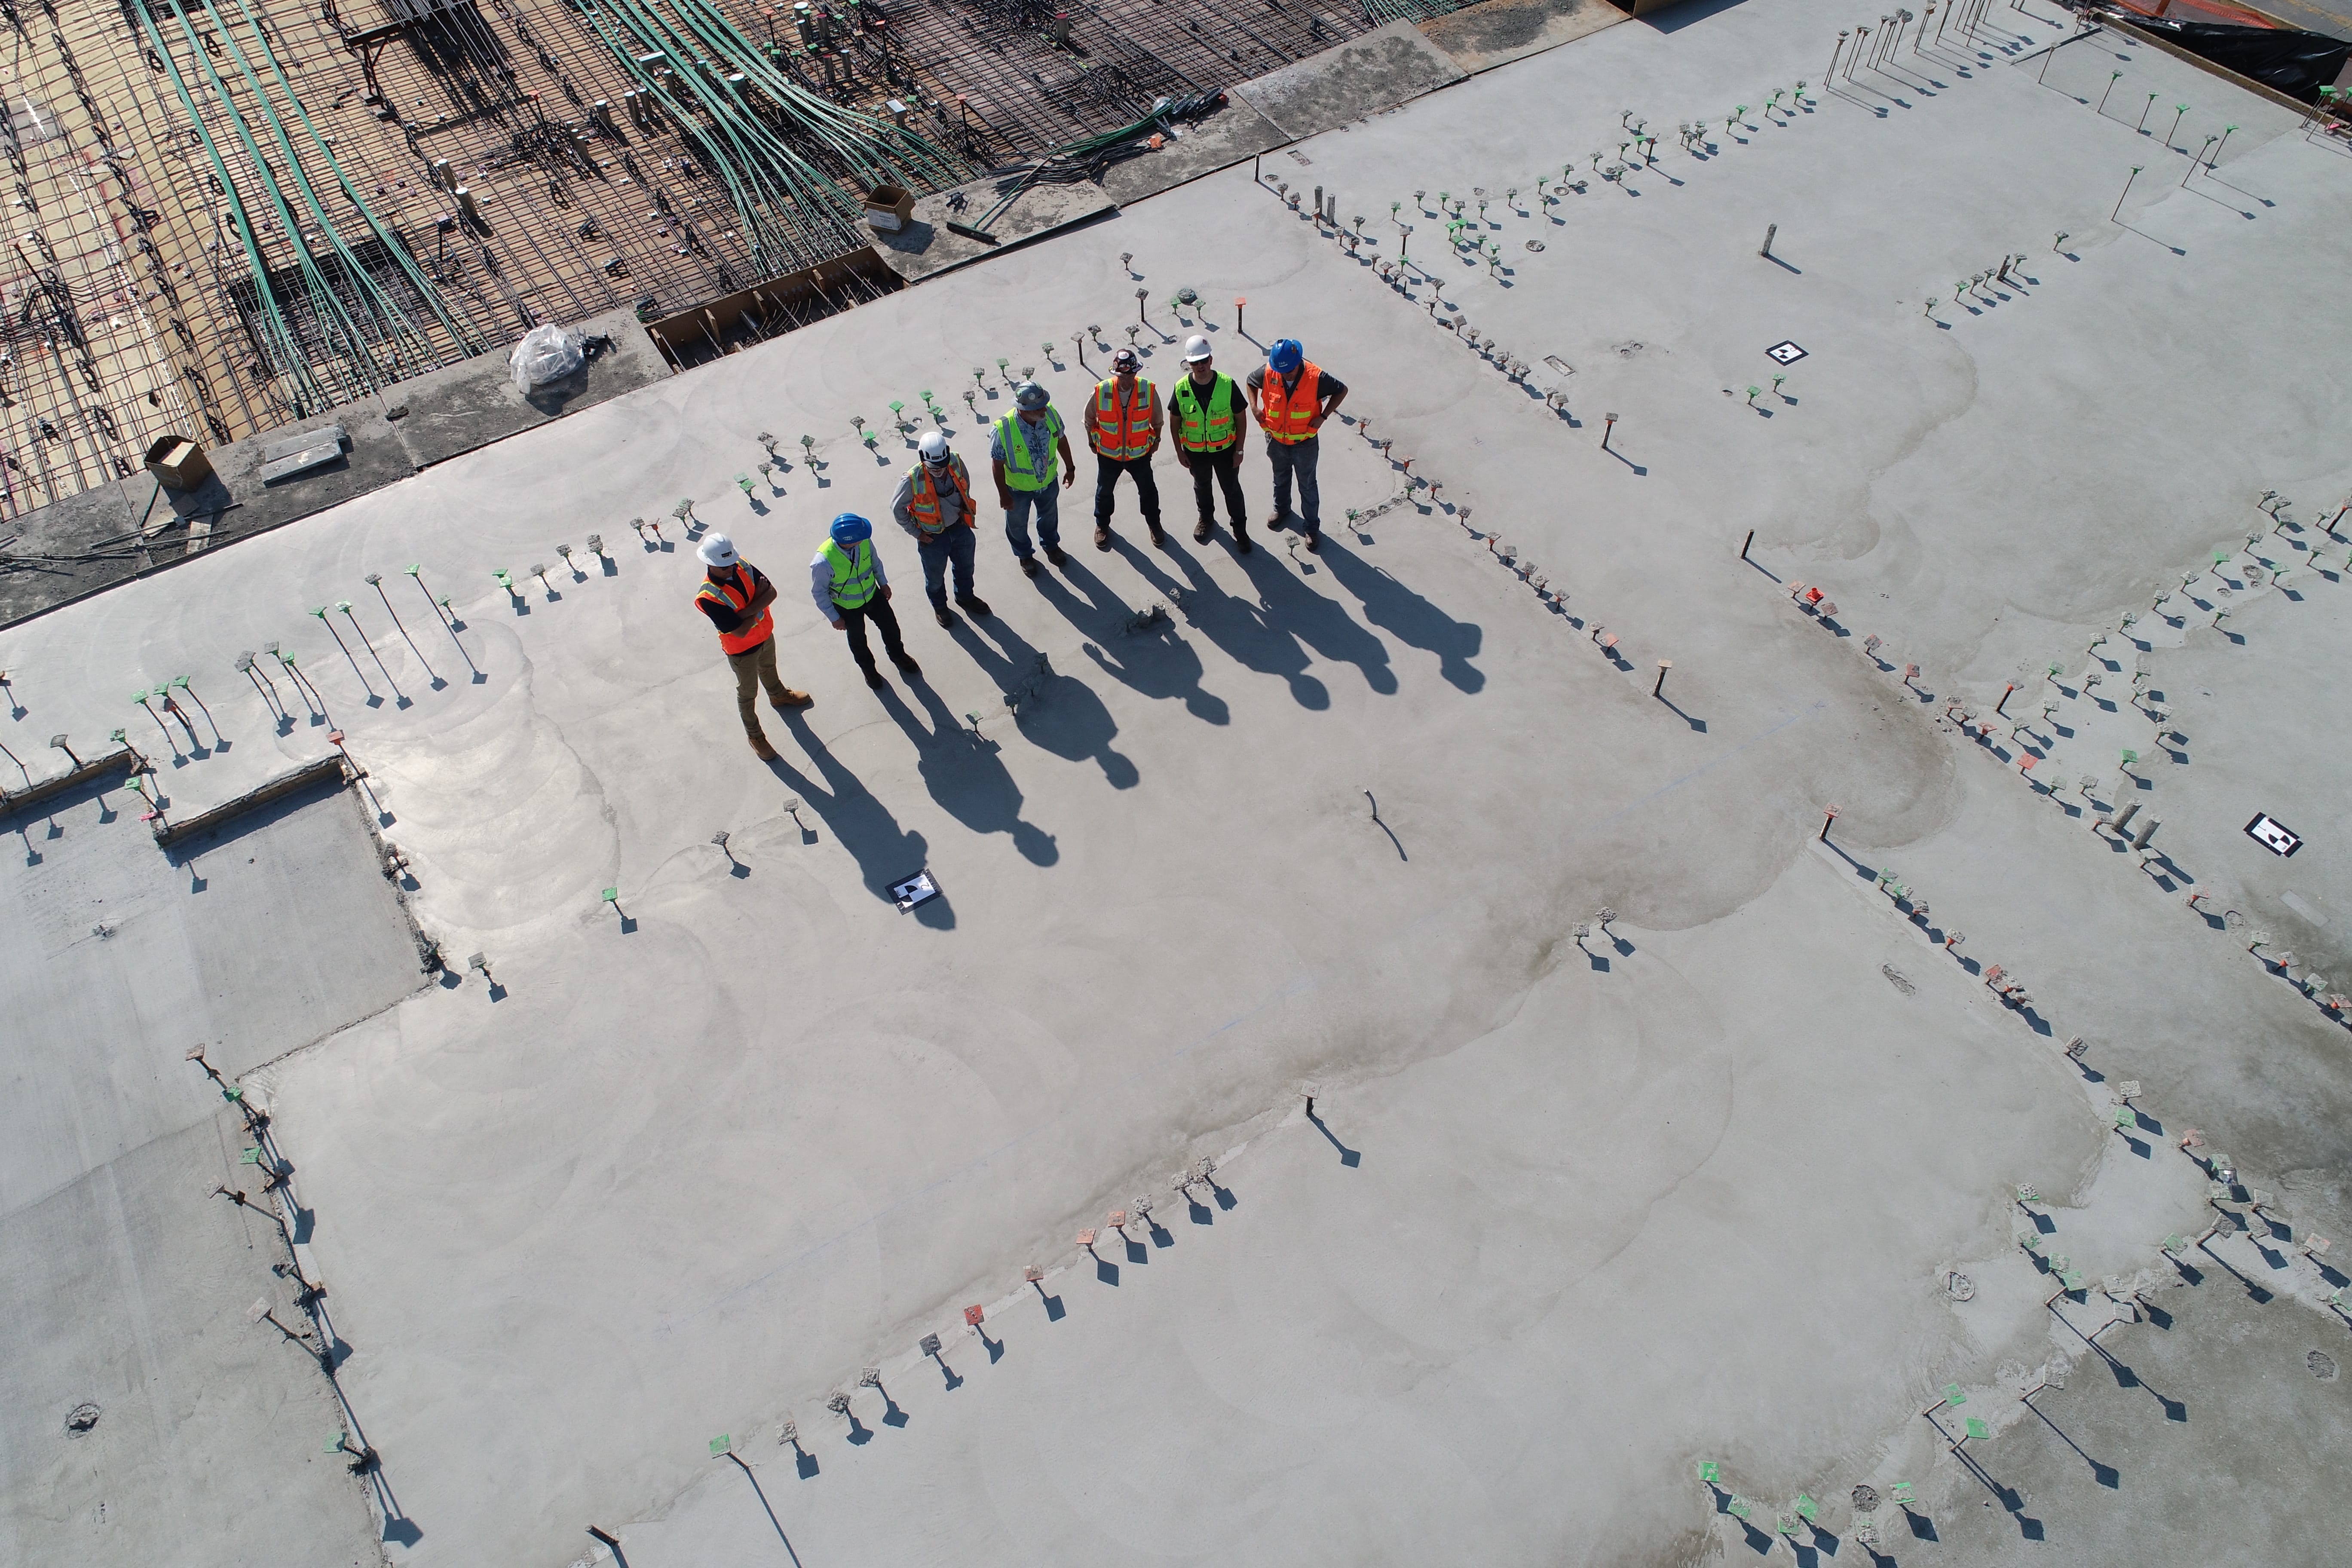 Seven construction workers standing on a white field; image by Scott Blake, via Unsplash.com.